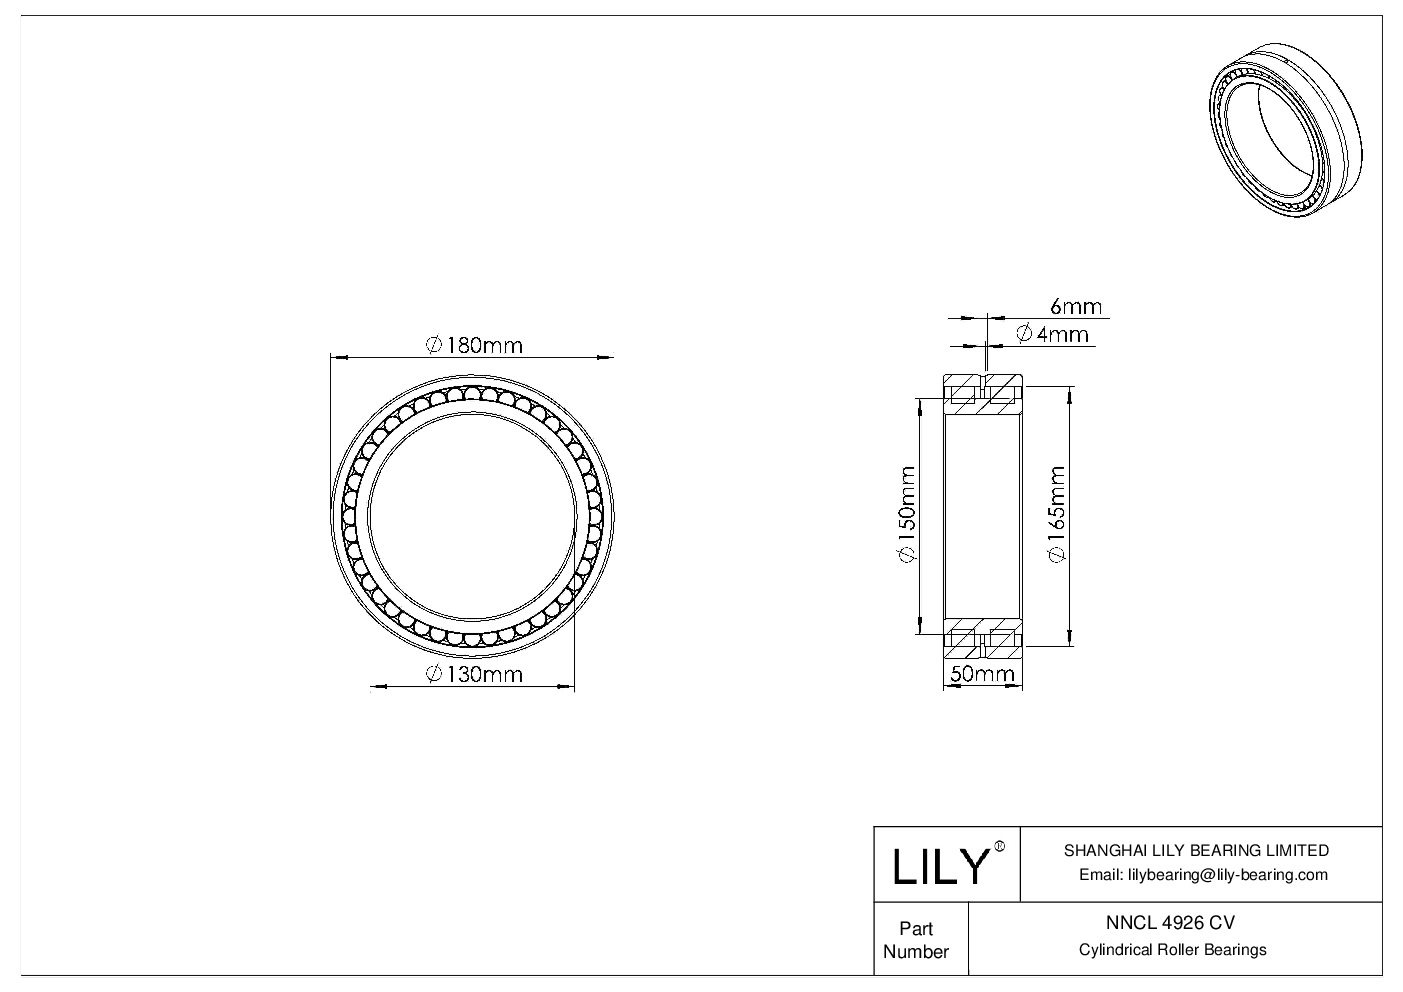 NNCL 4926 CV Double Row Full Complement Cylindrical Roller Bearings cad drawing